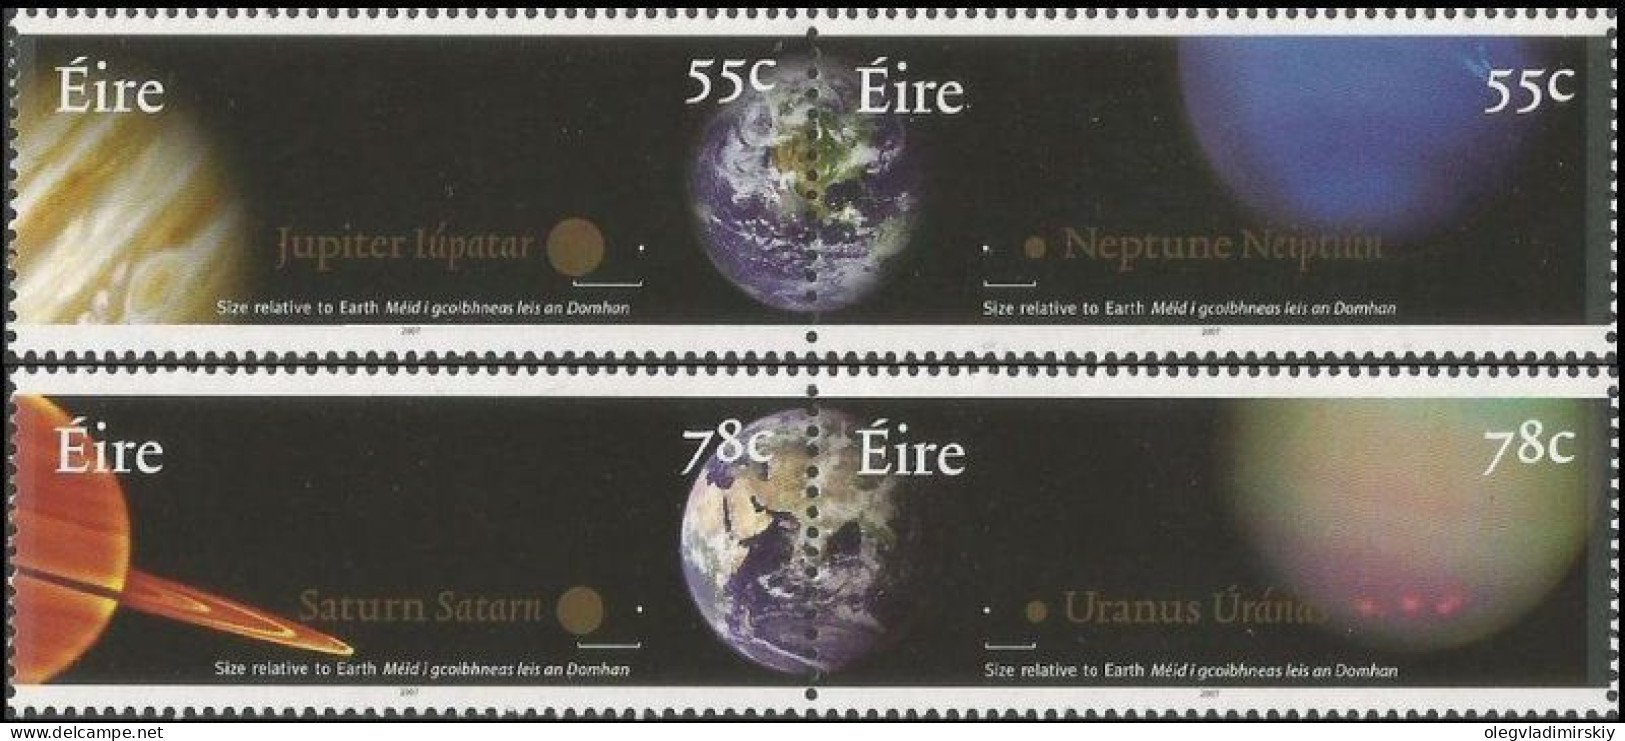 Ireland Irland Irlande 2007 Solar System Planets Set Of 4 Stamps In 2 Strips MNH - Neufs